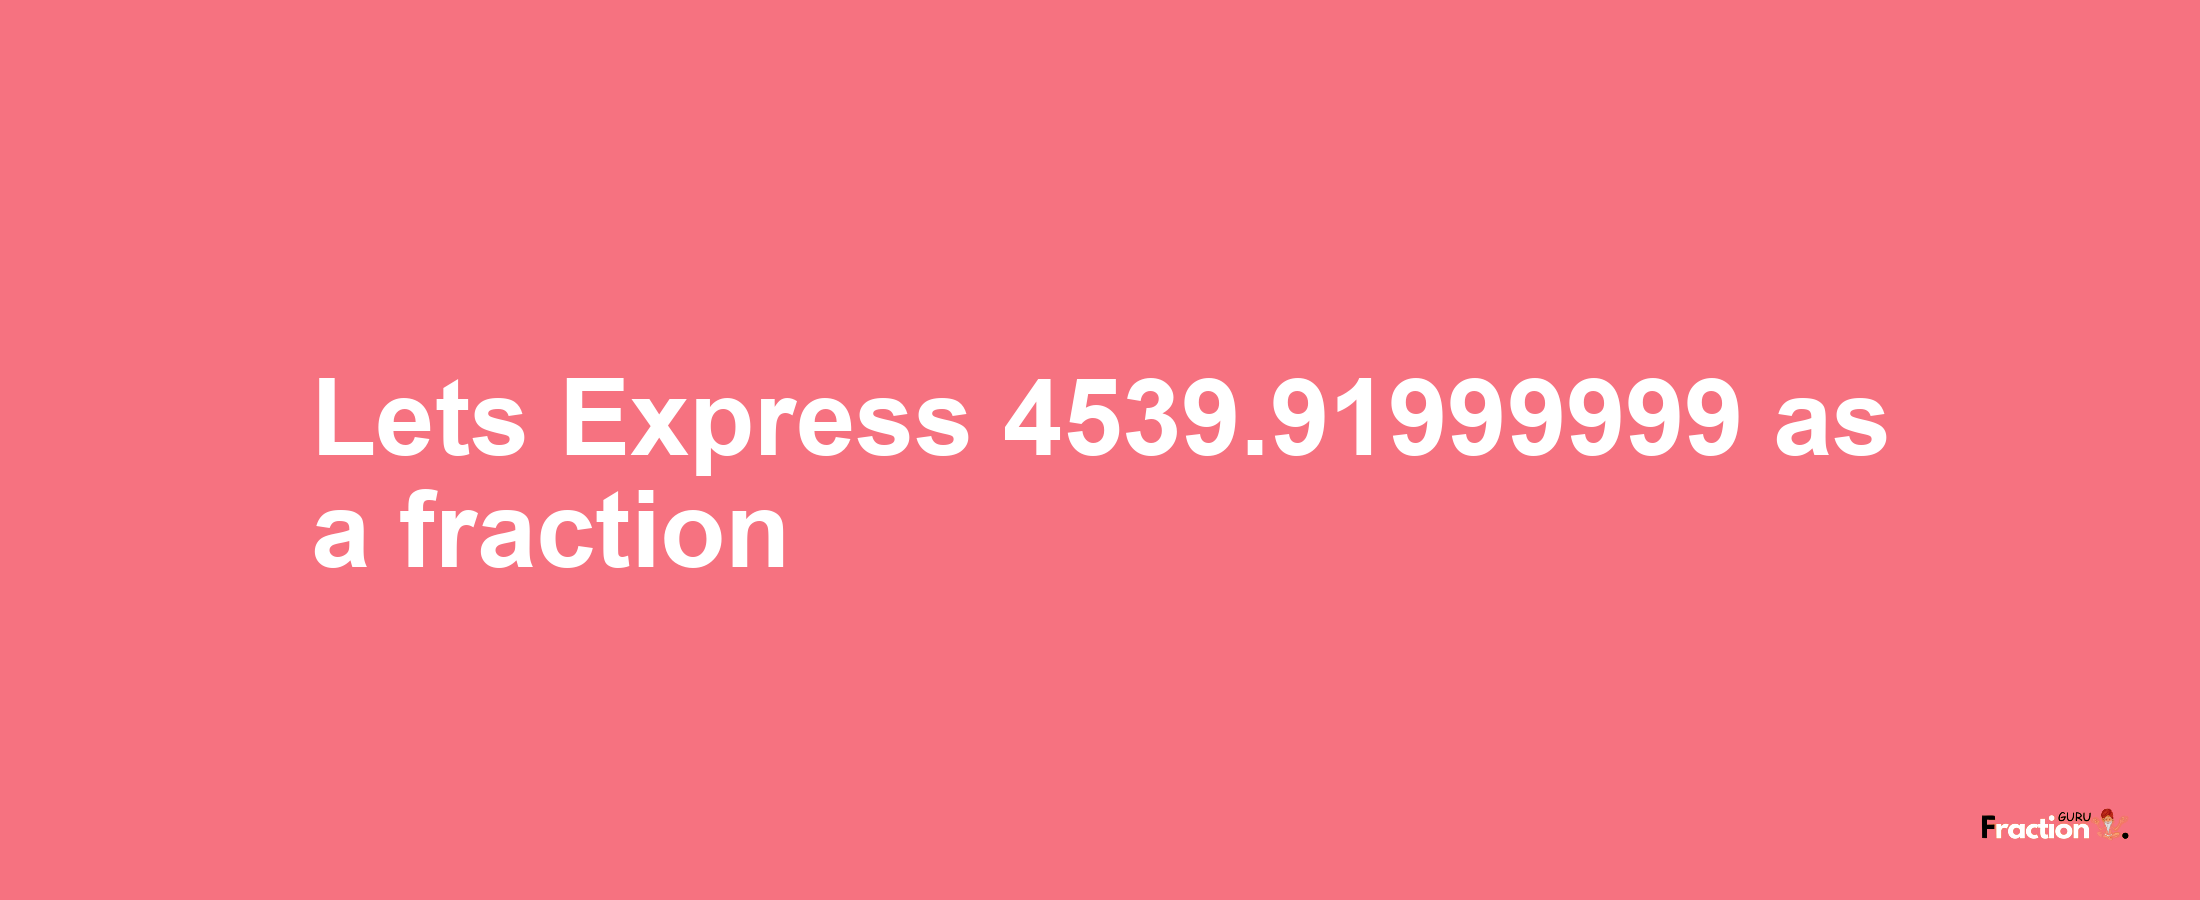 Lets Express 4539.91999999 as afraction